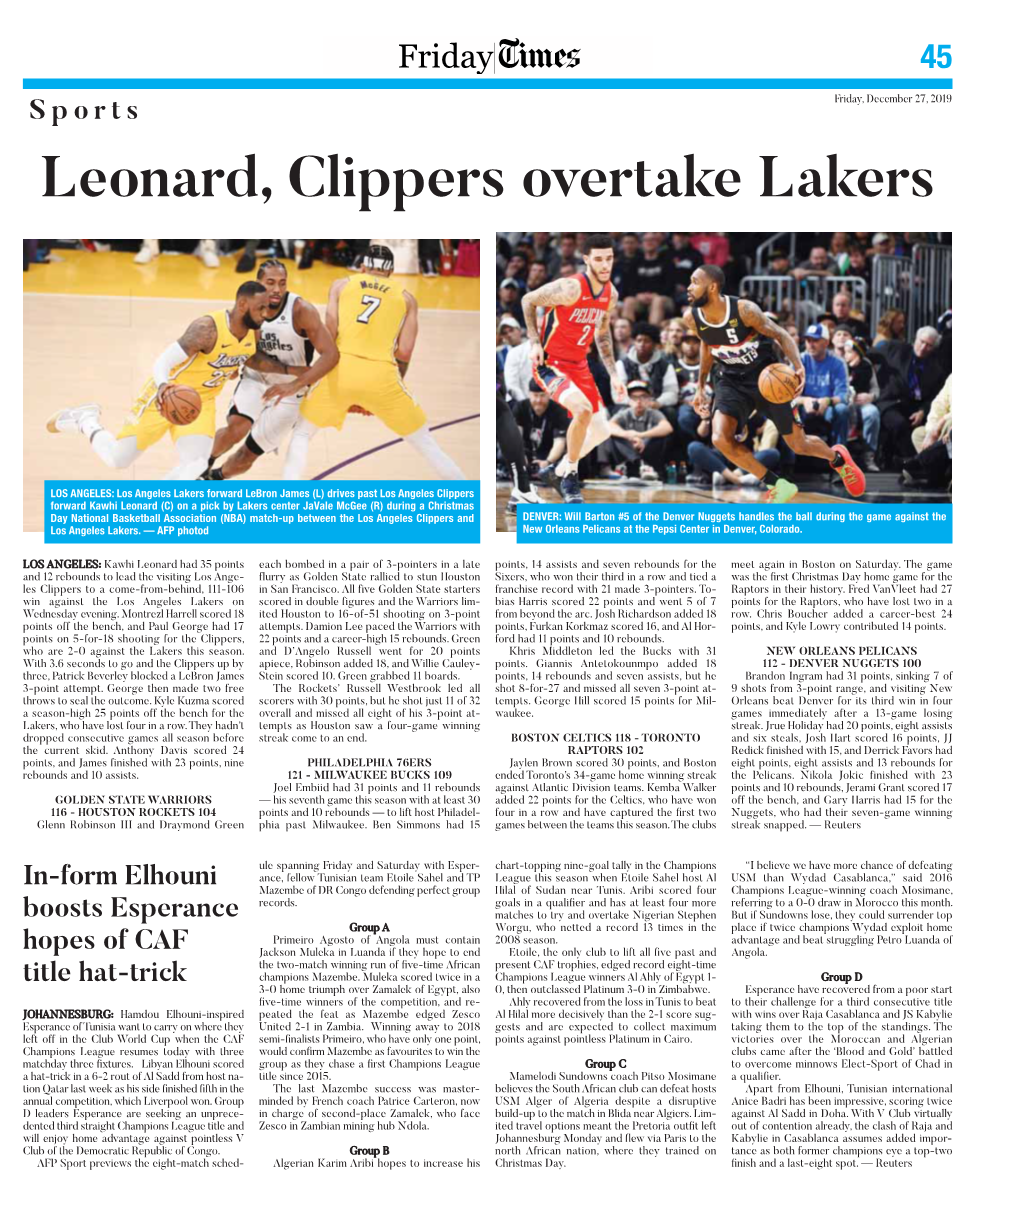 Leonard, Clippers Overtake Lakers